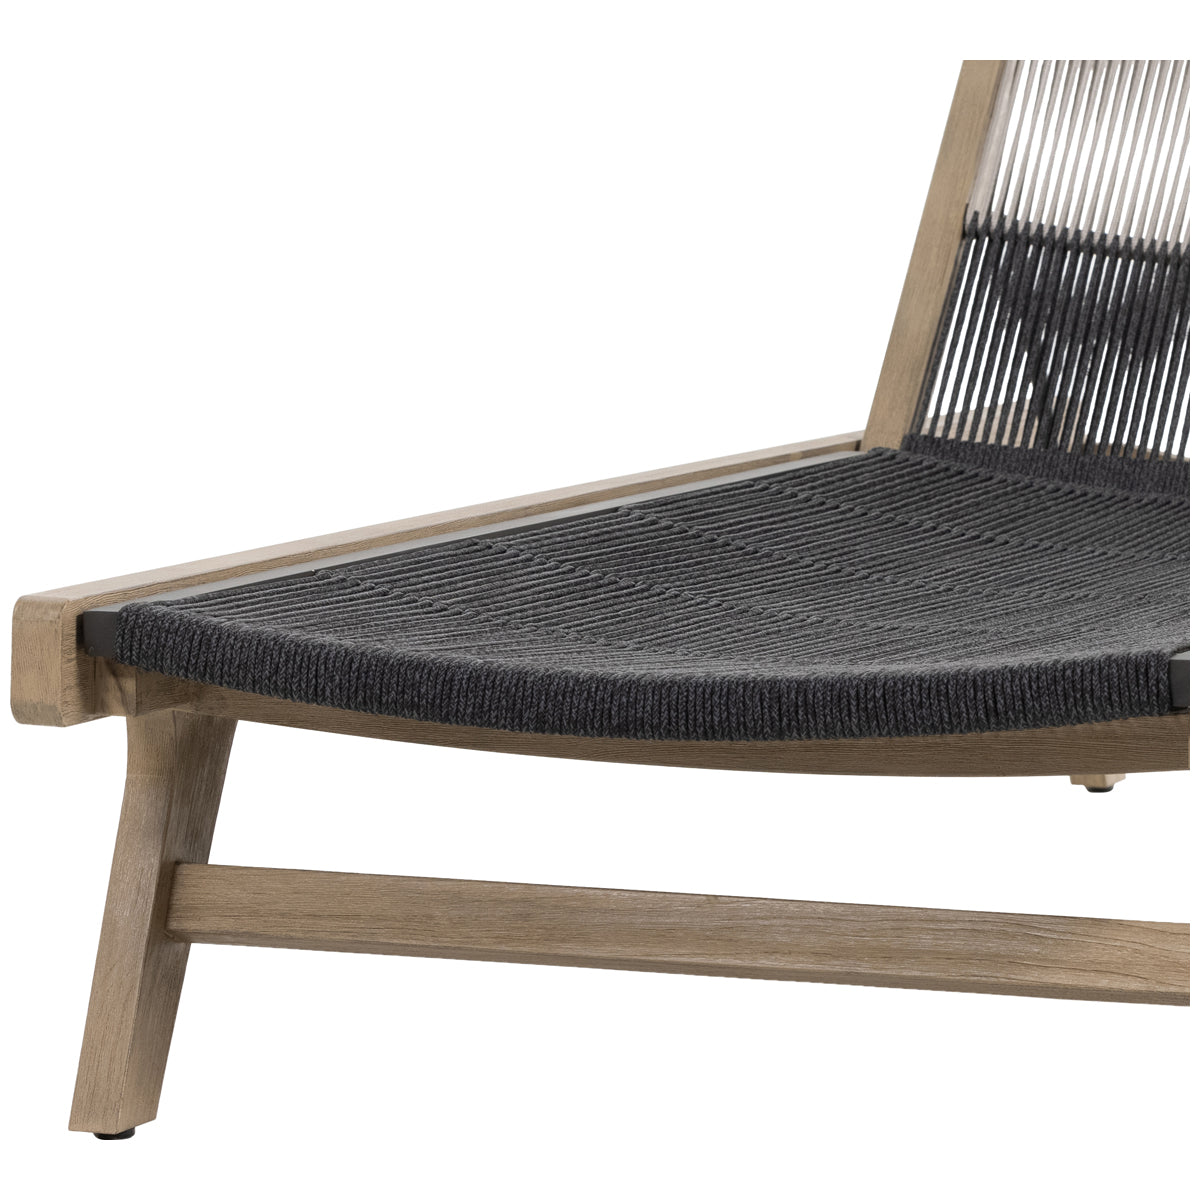 Four Hands Solano Julian Outdoor Chaise